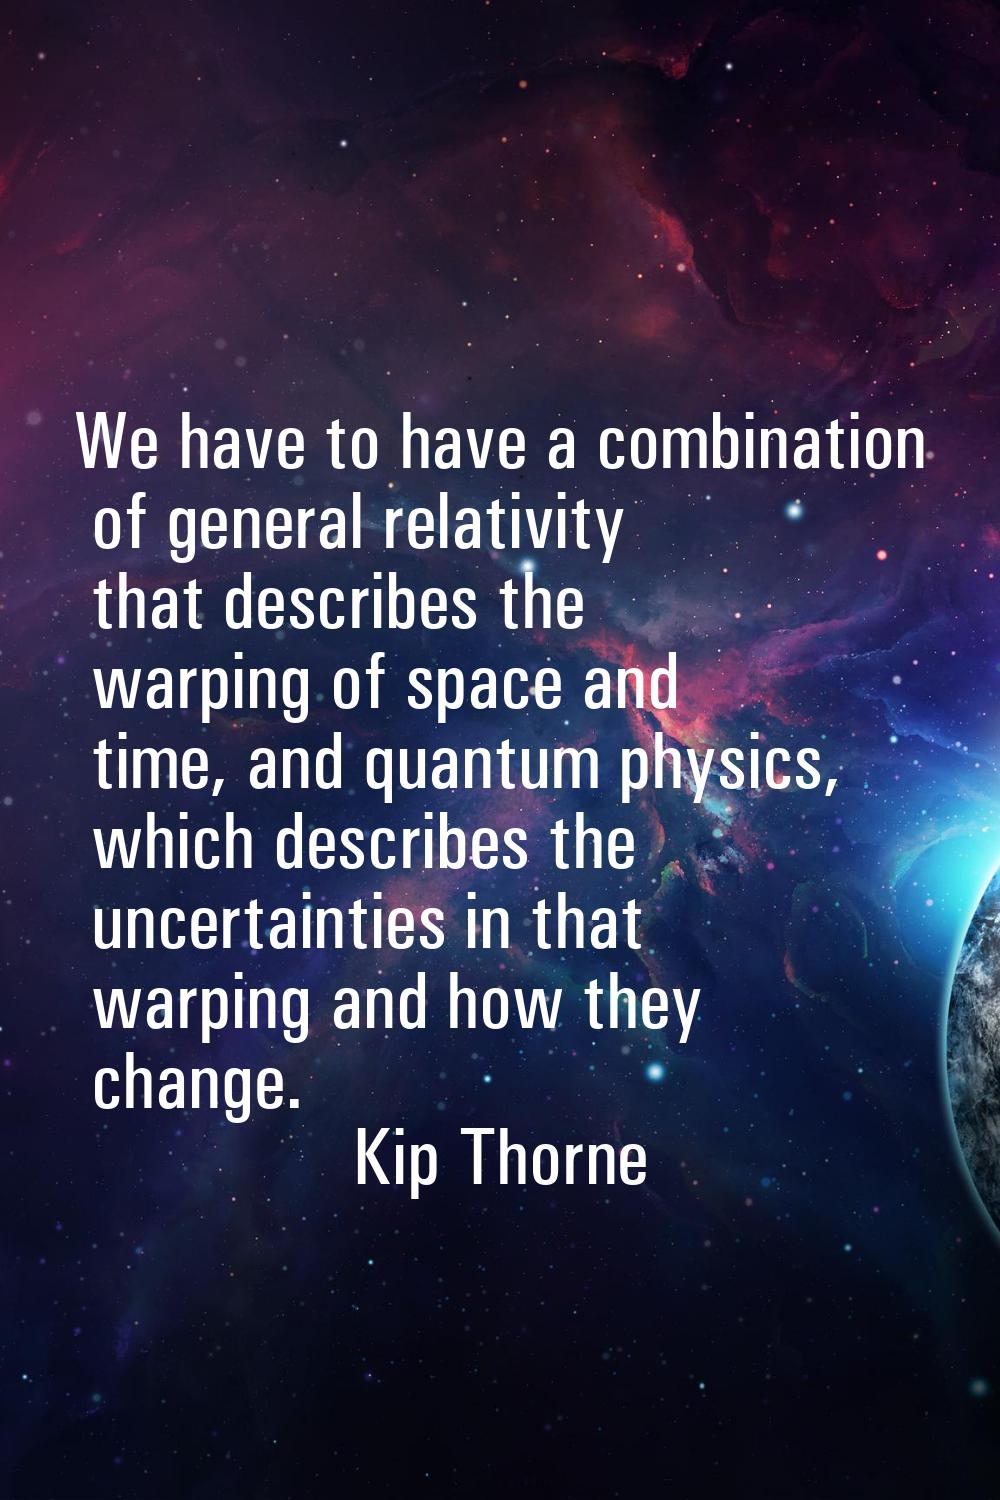 We have to have a combination of general relativity that describes the warping of space and time, a